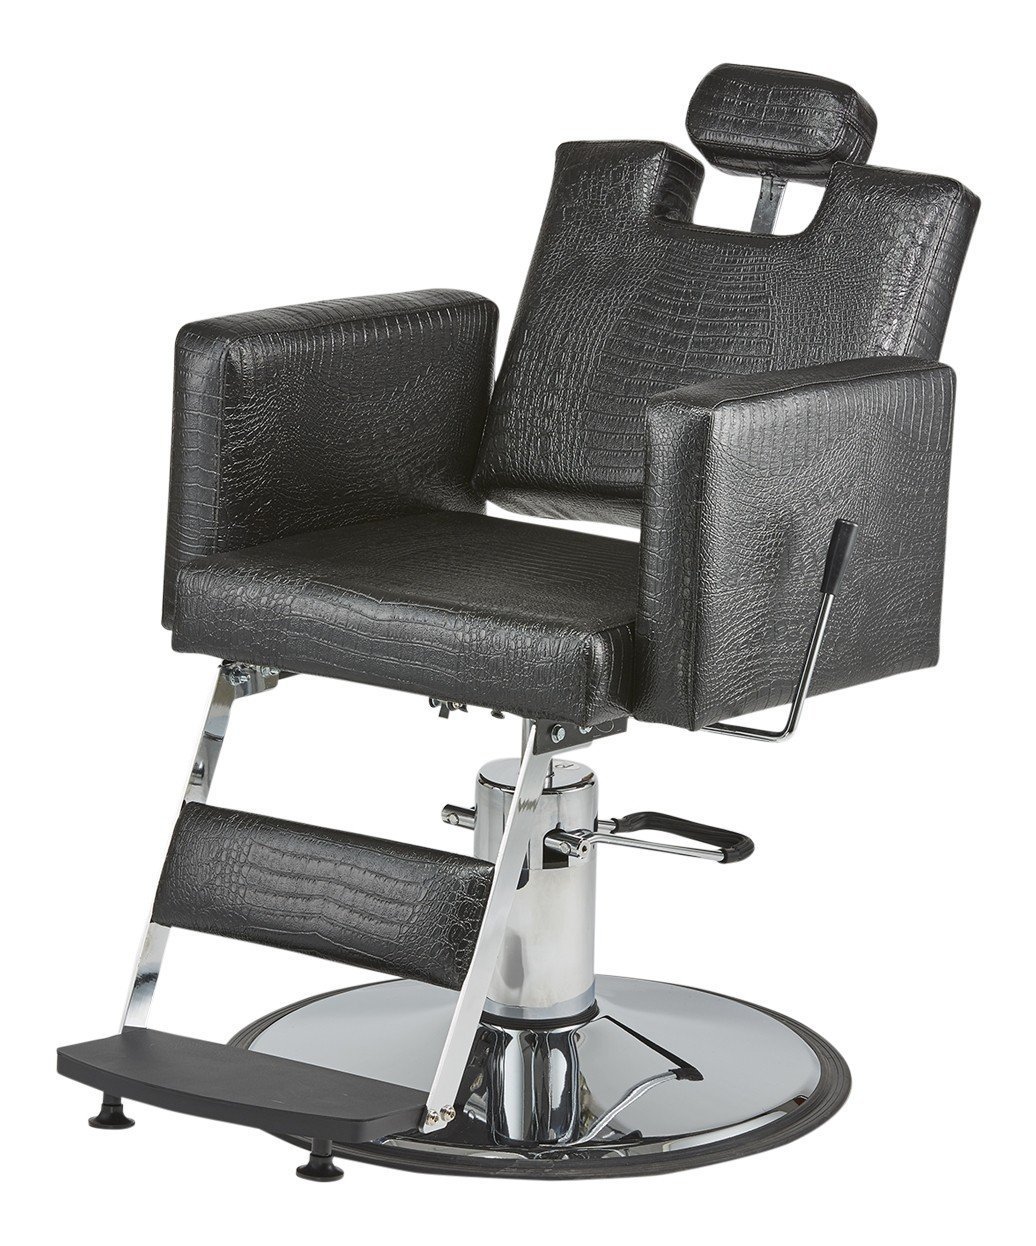 Pibbs 3491 Cosmo Barber Chair